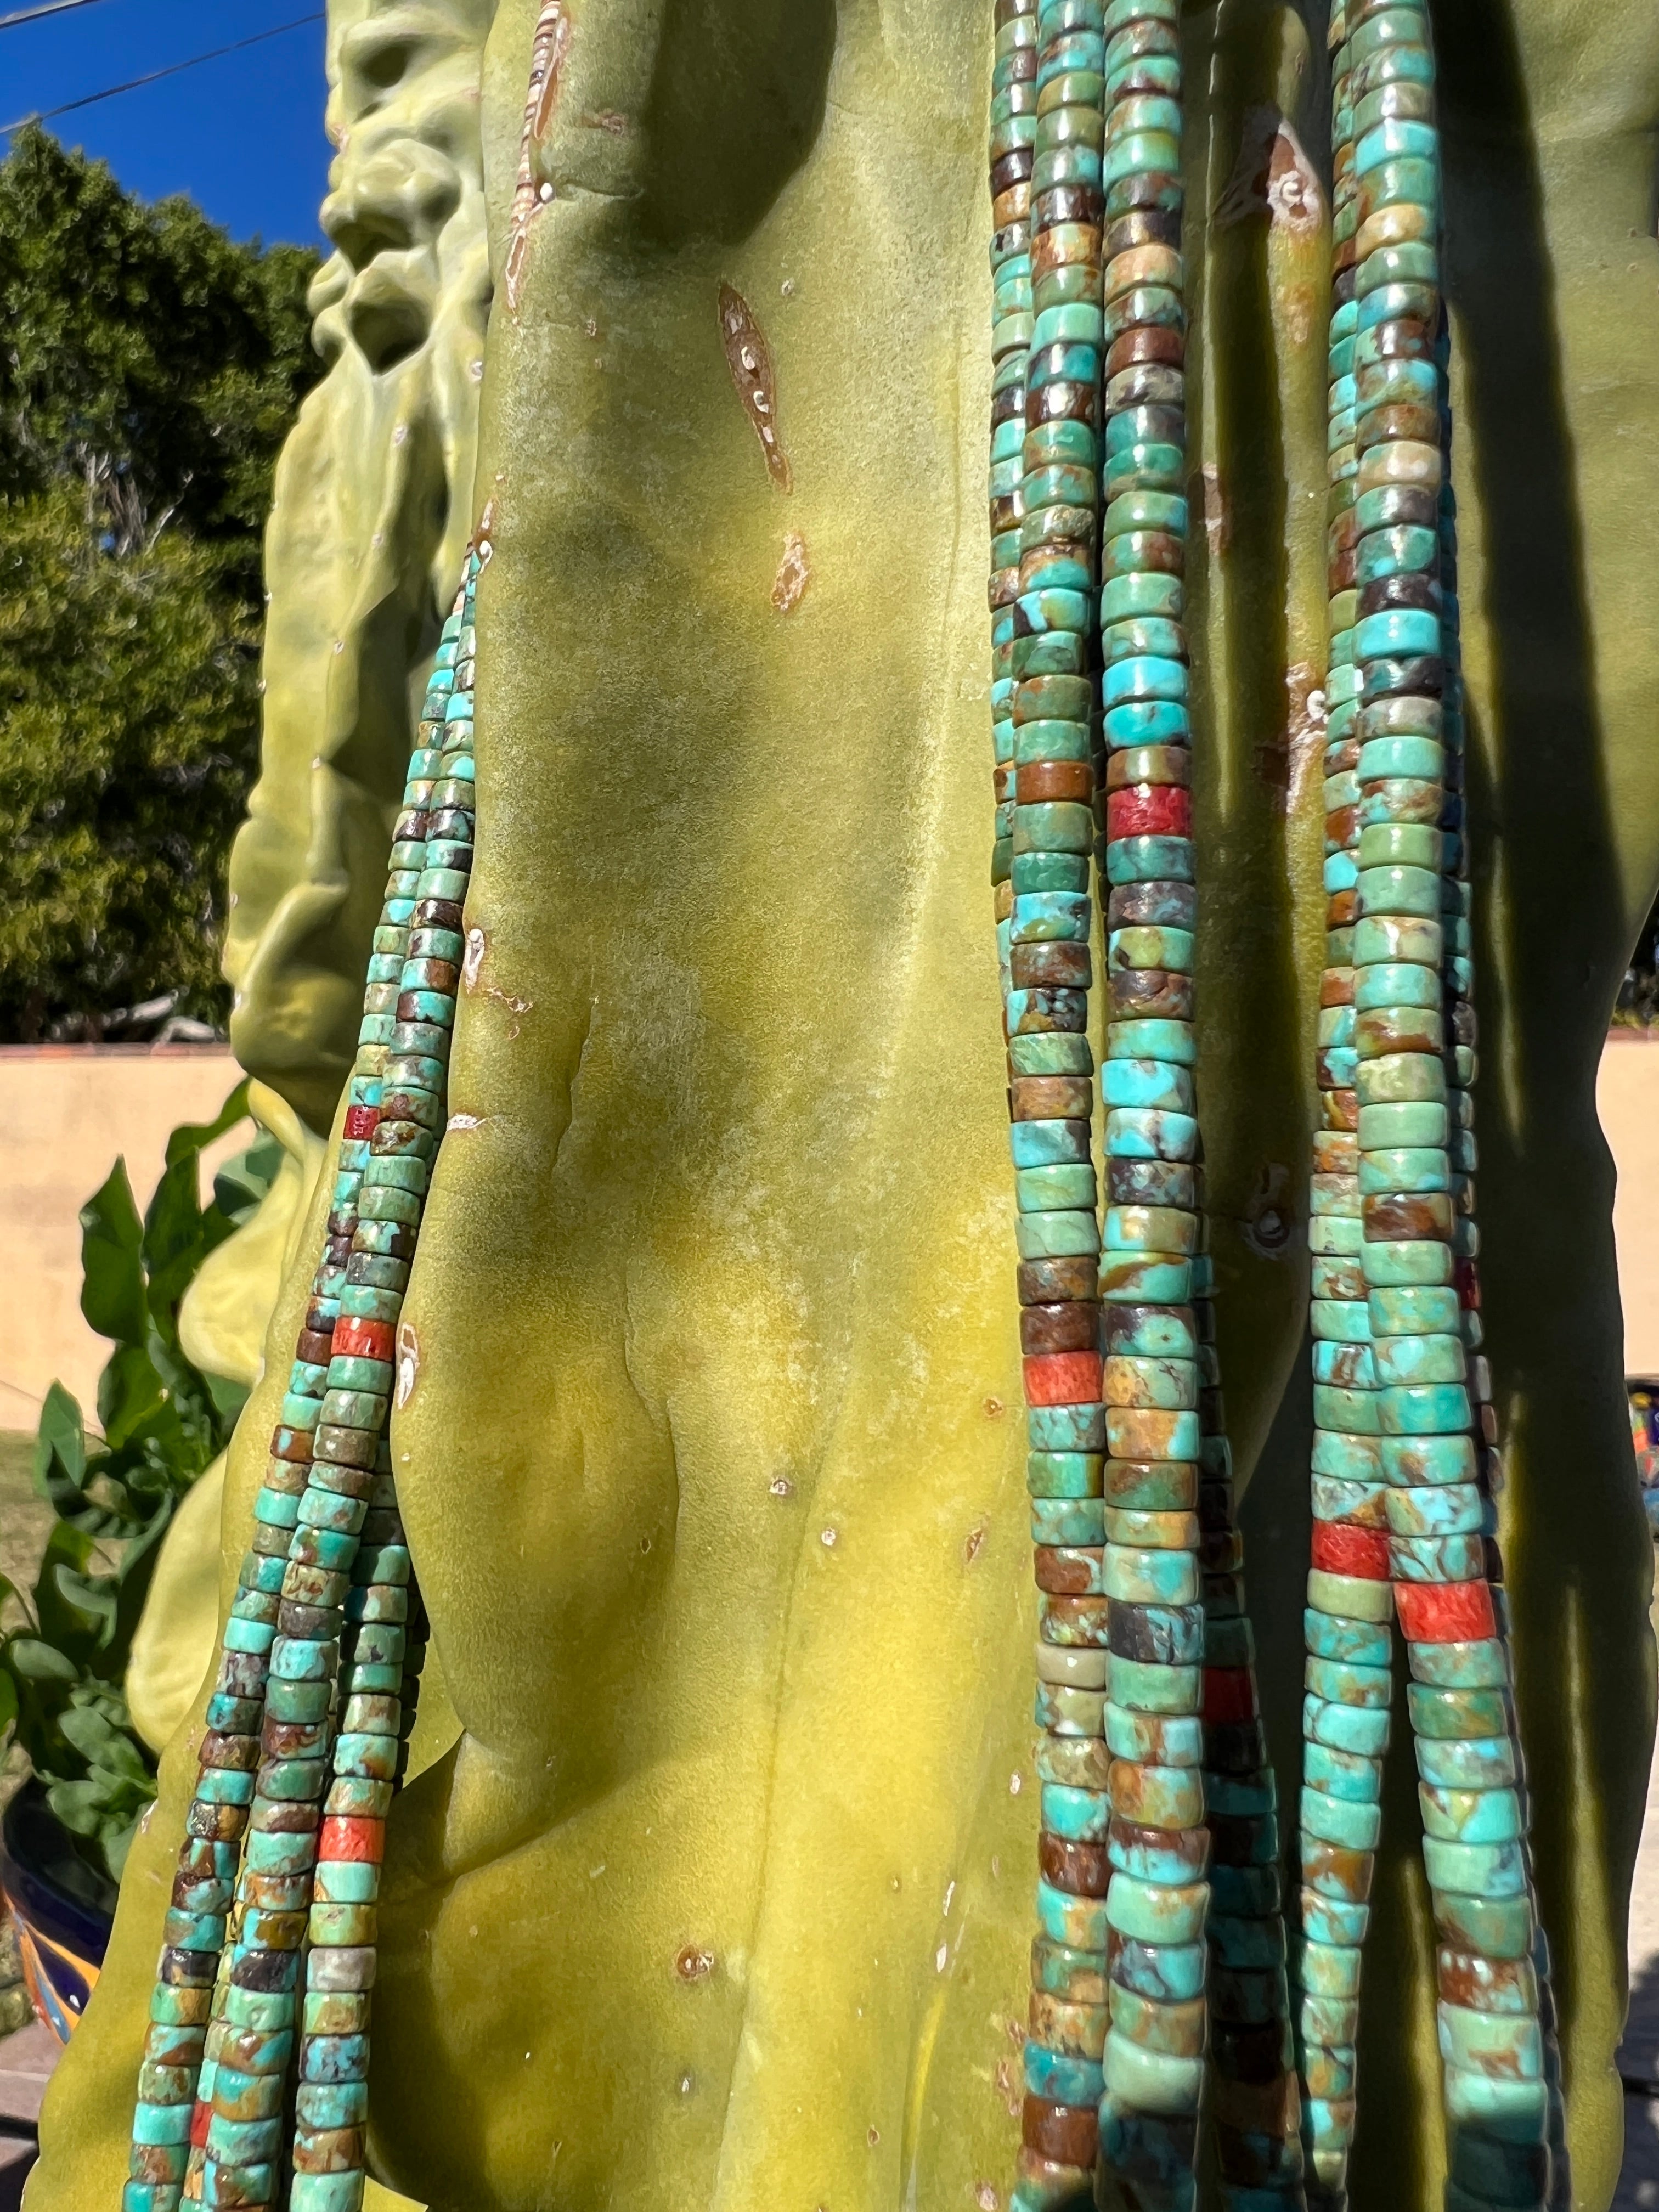 Royston Turquoise, Coral, and Shell Heishi Seven Strand Necklace